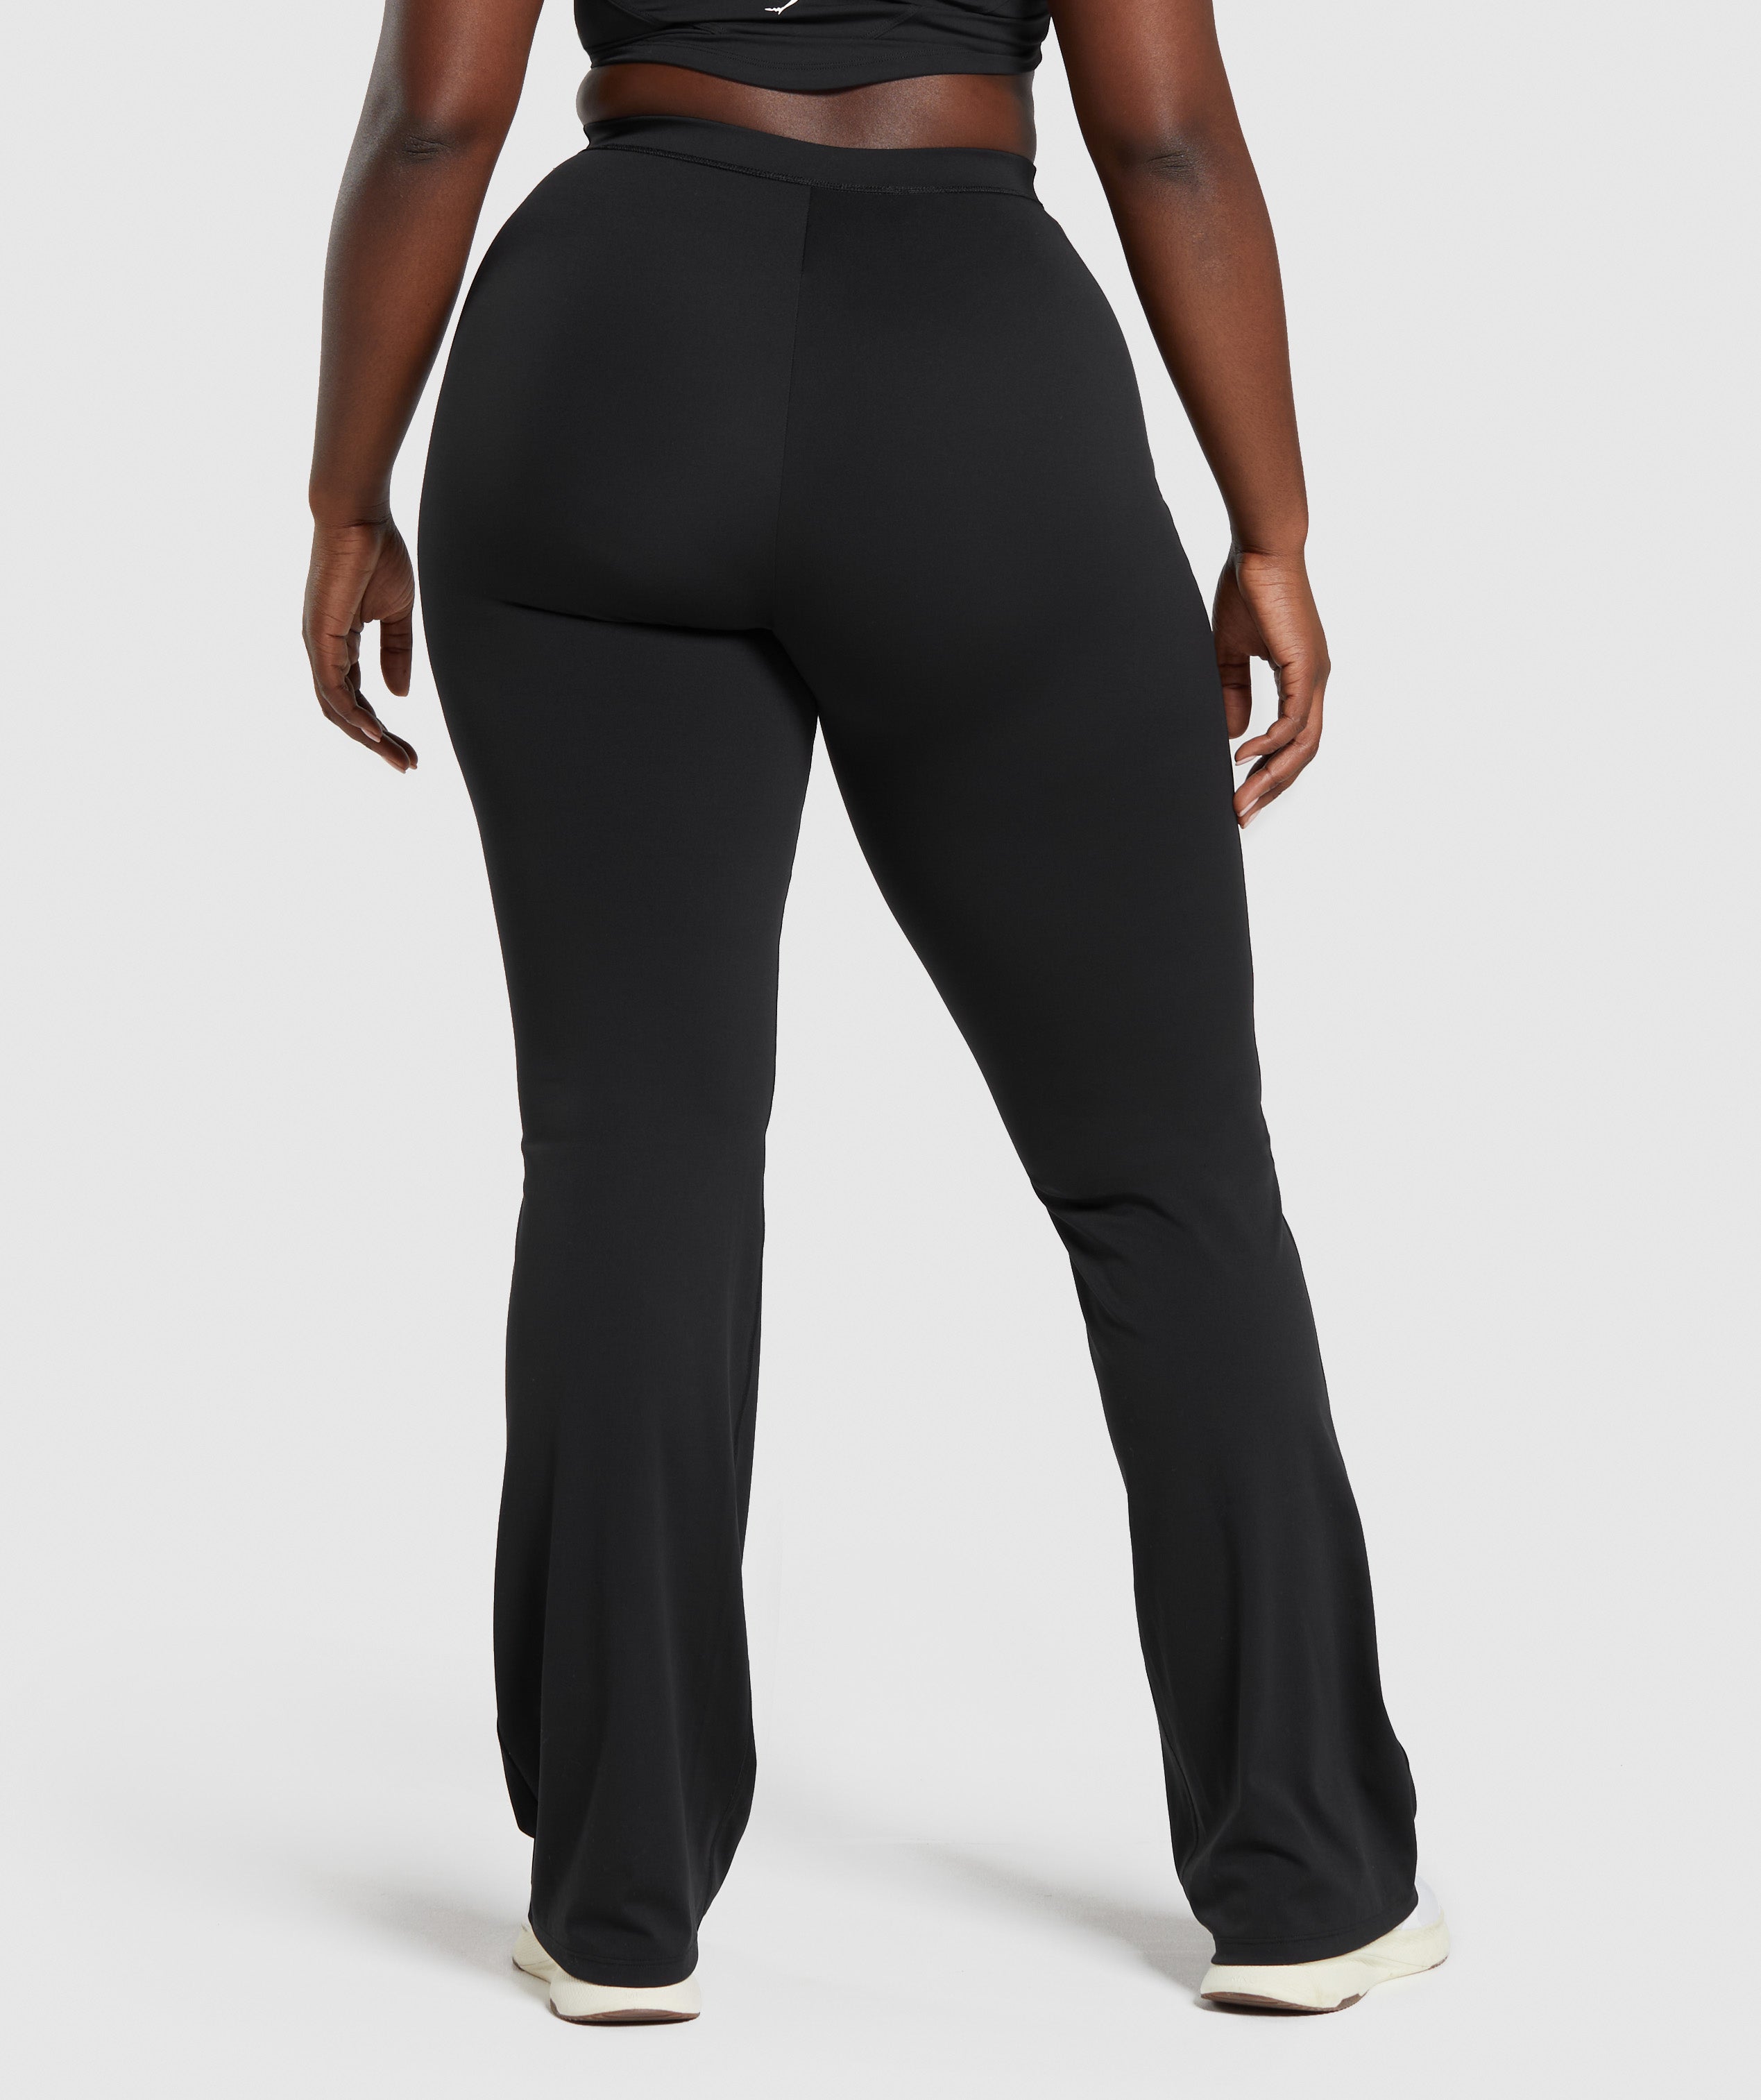 Everyday Tall Flared Leggings in Black - view 7